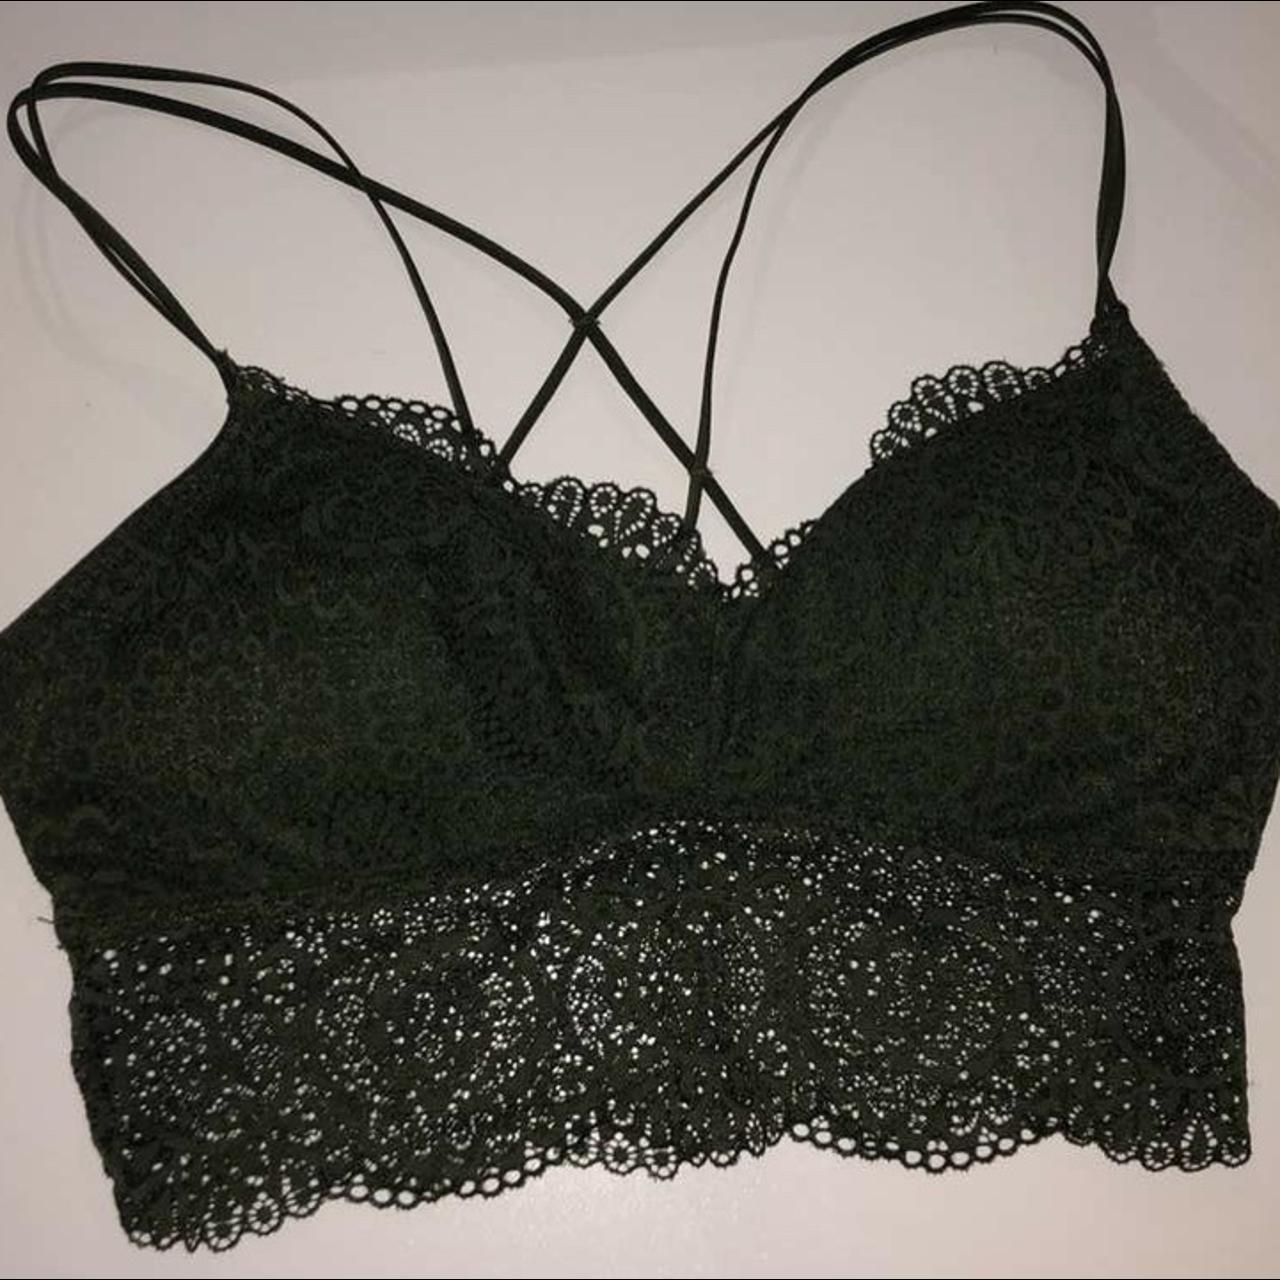 Gilly hicks Lace Bralette, Khaki green, Crop top, Never